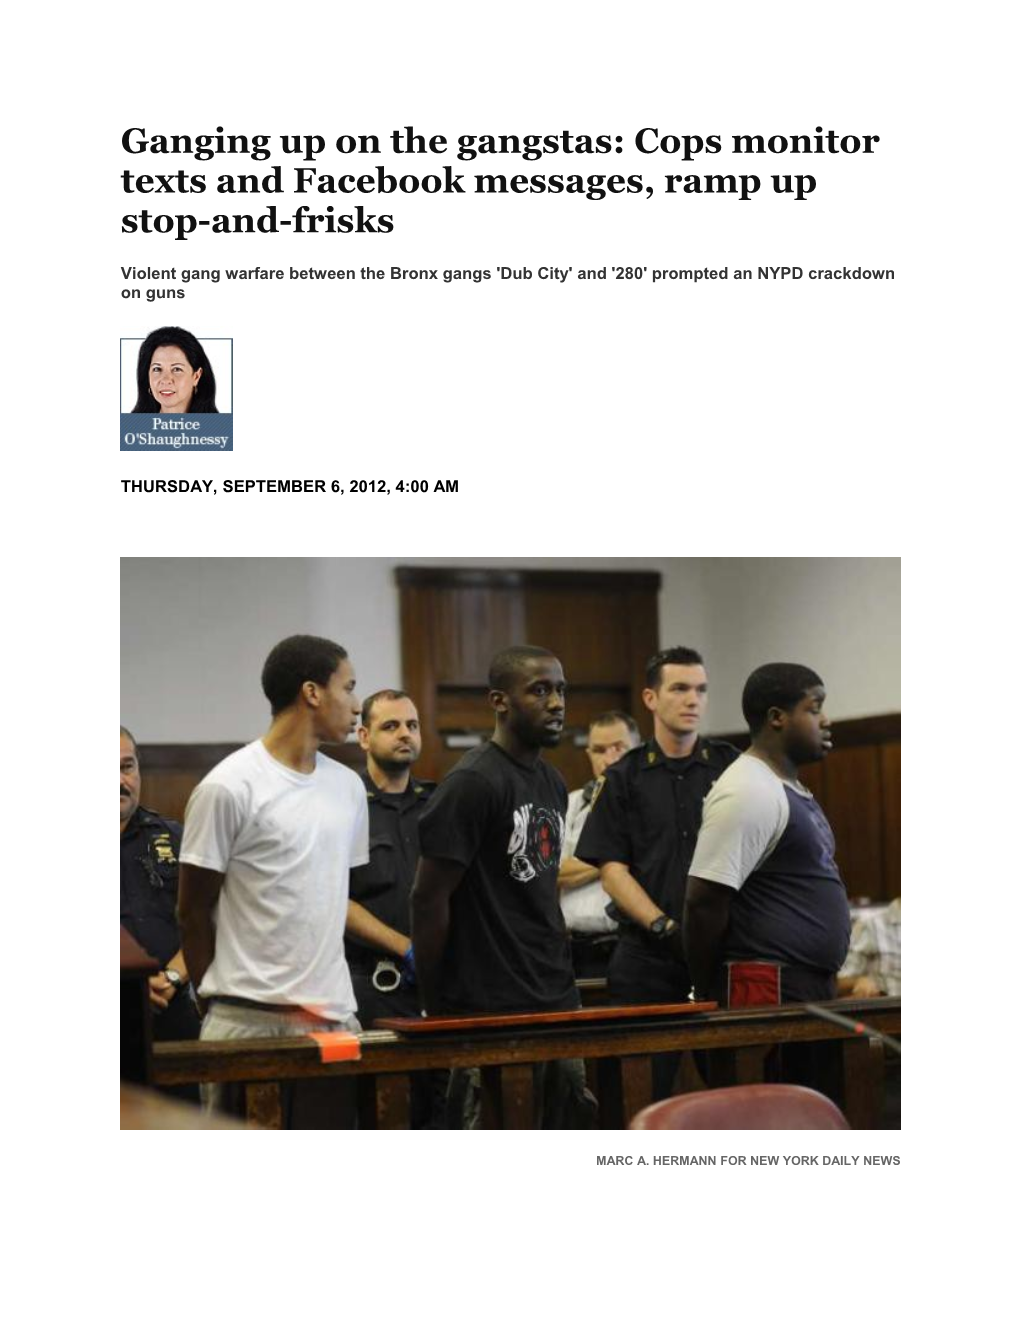 Ganging up on the Gangstas: Cops Monitor Texts and Facebook Messages, Ramp up Stop-And-Frisks